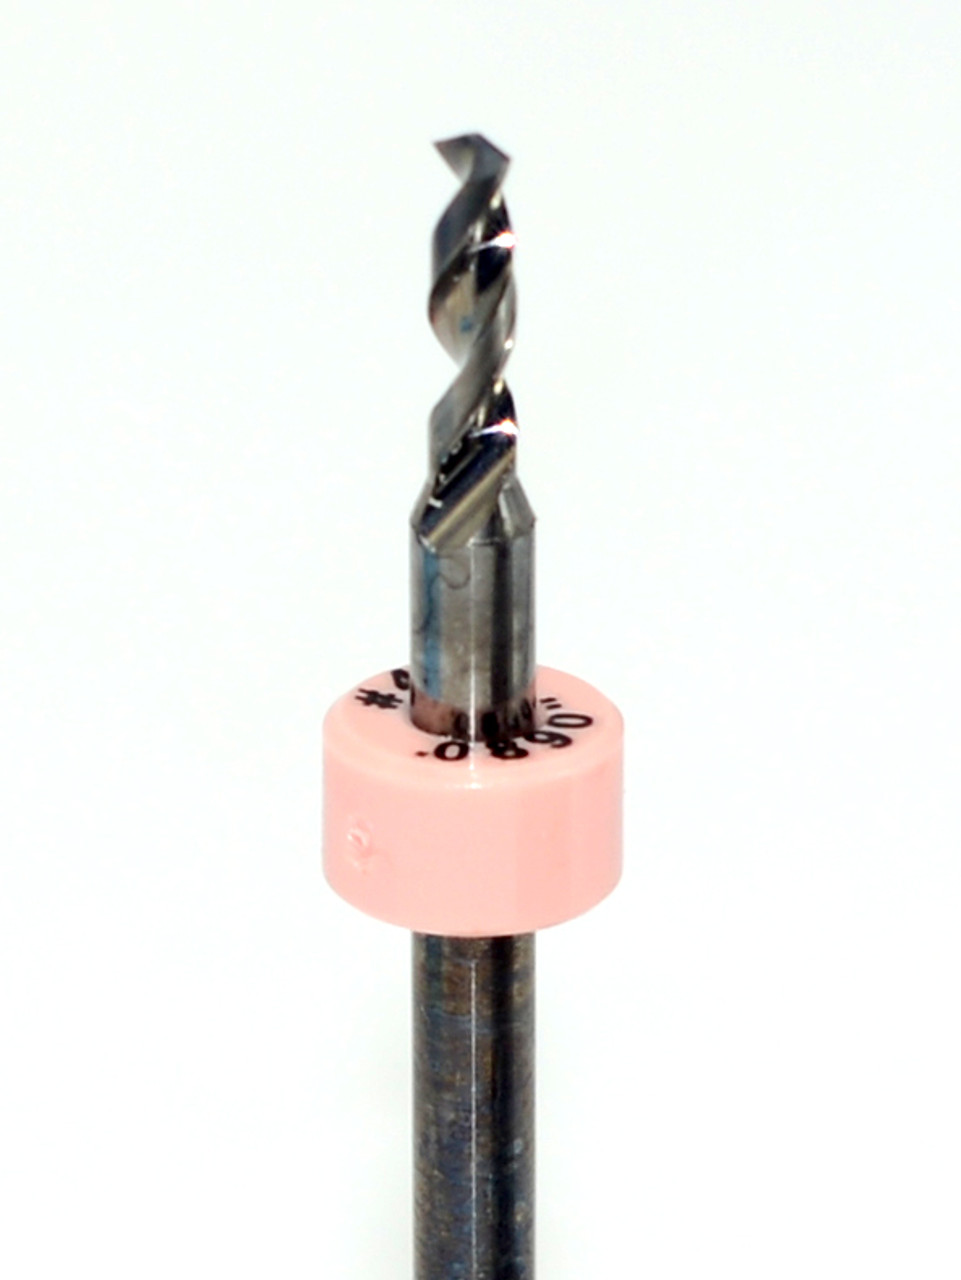 Drill bit Size: 2.26mm   #43 

 Flute length: sizes .50 to .65mm 8.90mm, sizes .70 to 2.50mm 10.50mm

Drill Point 135Â°, Shank .125â€ / 3.18mm,Overall length 38mm /1.50â€

All bits have plastic size rings, Material Micro-Grain Carbide Grade ISO K20 / K30

Drill bits Self centering on flat surface Other surfaces use center drill first